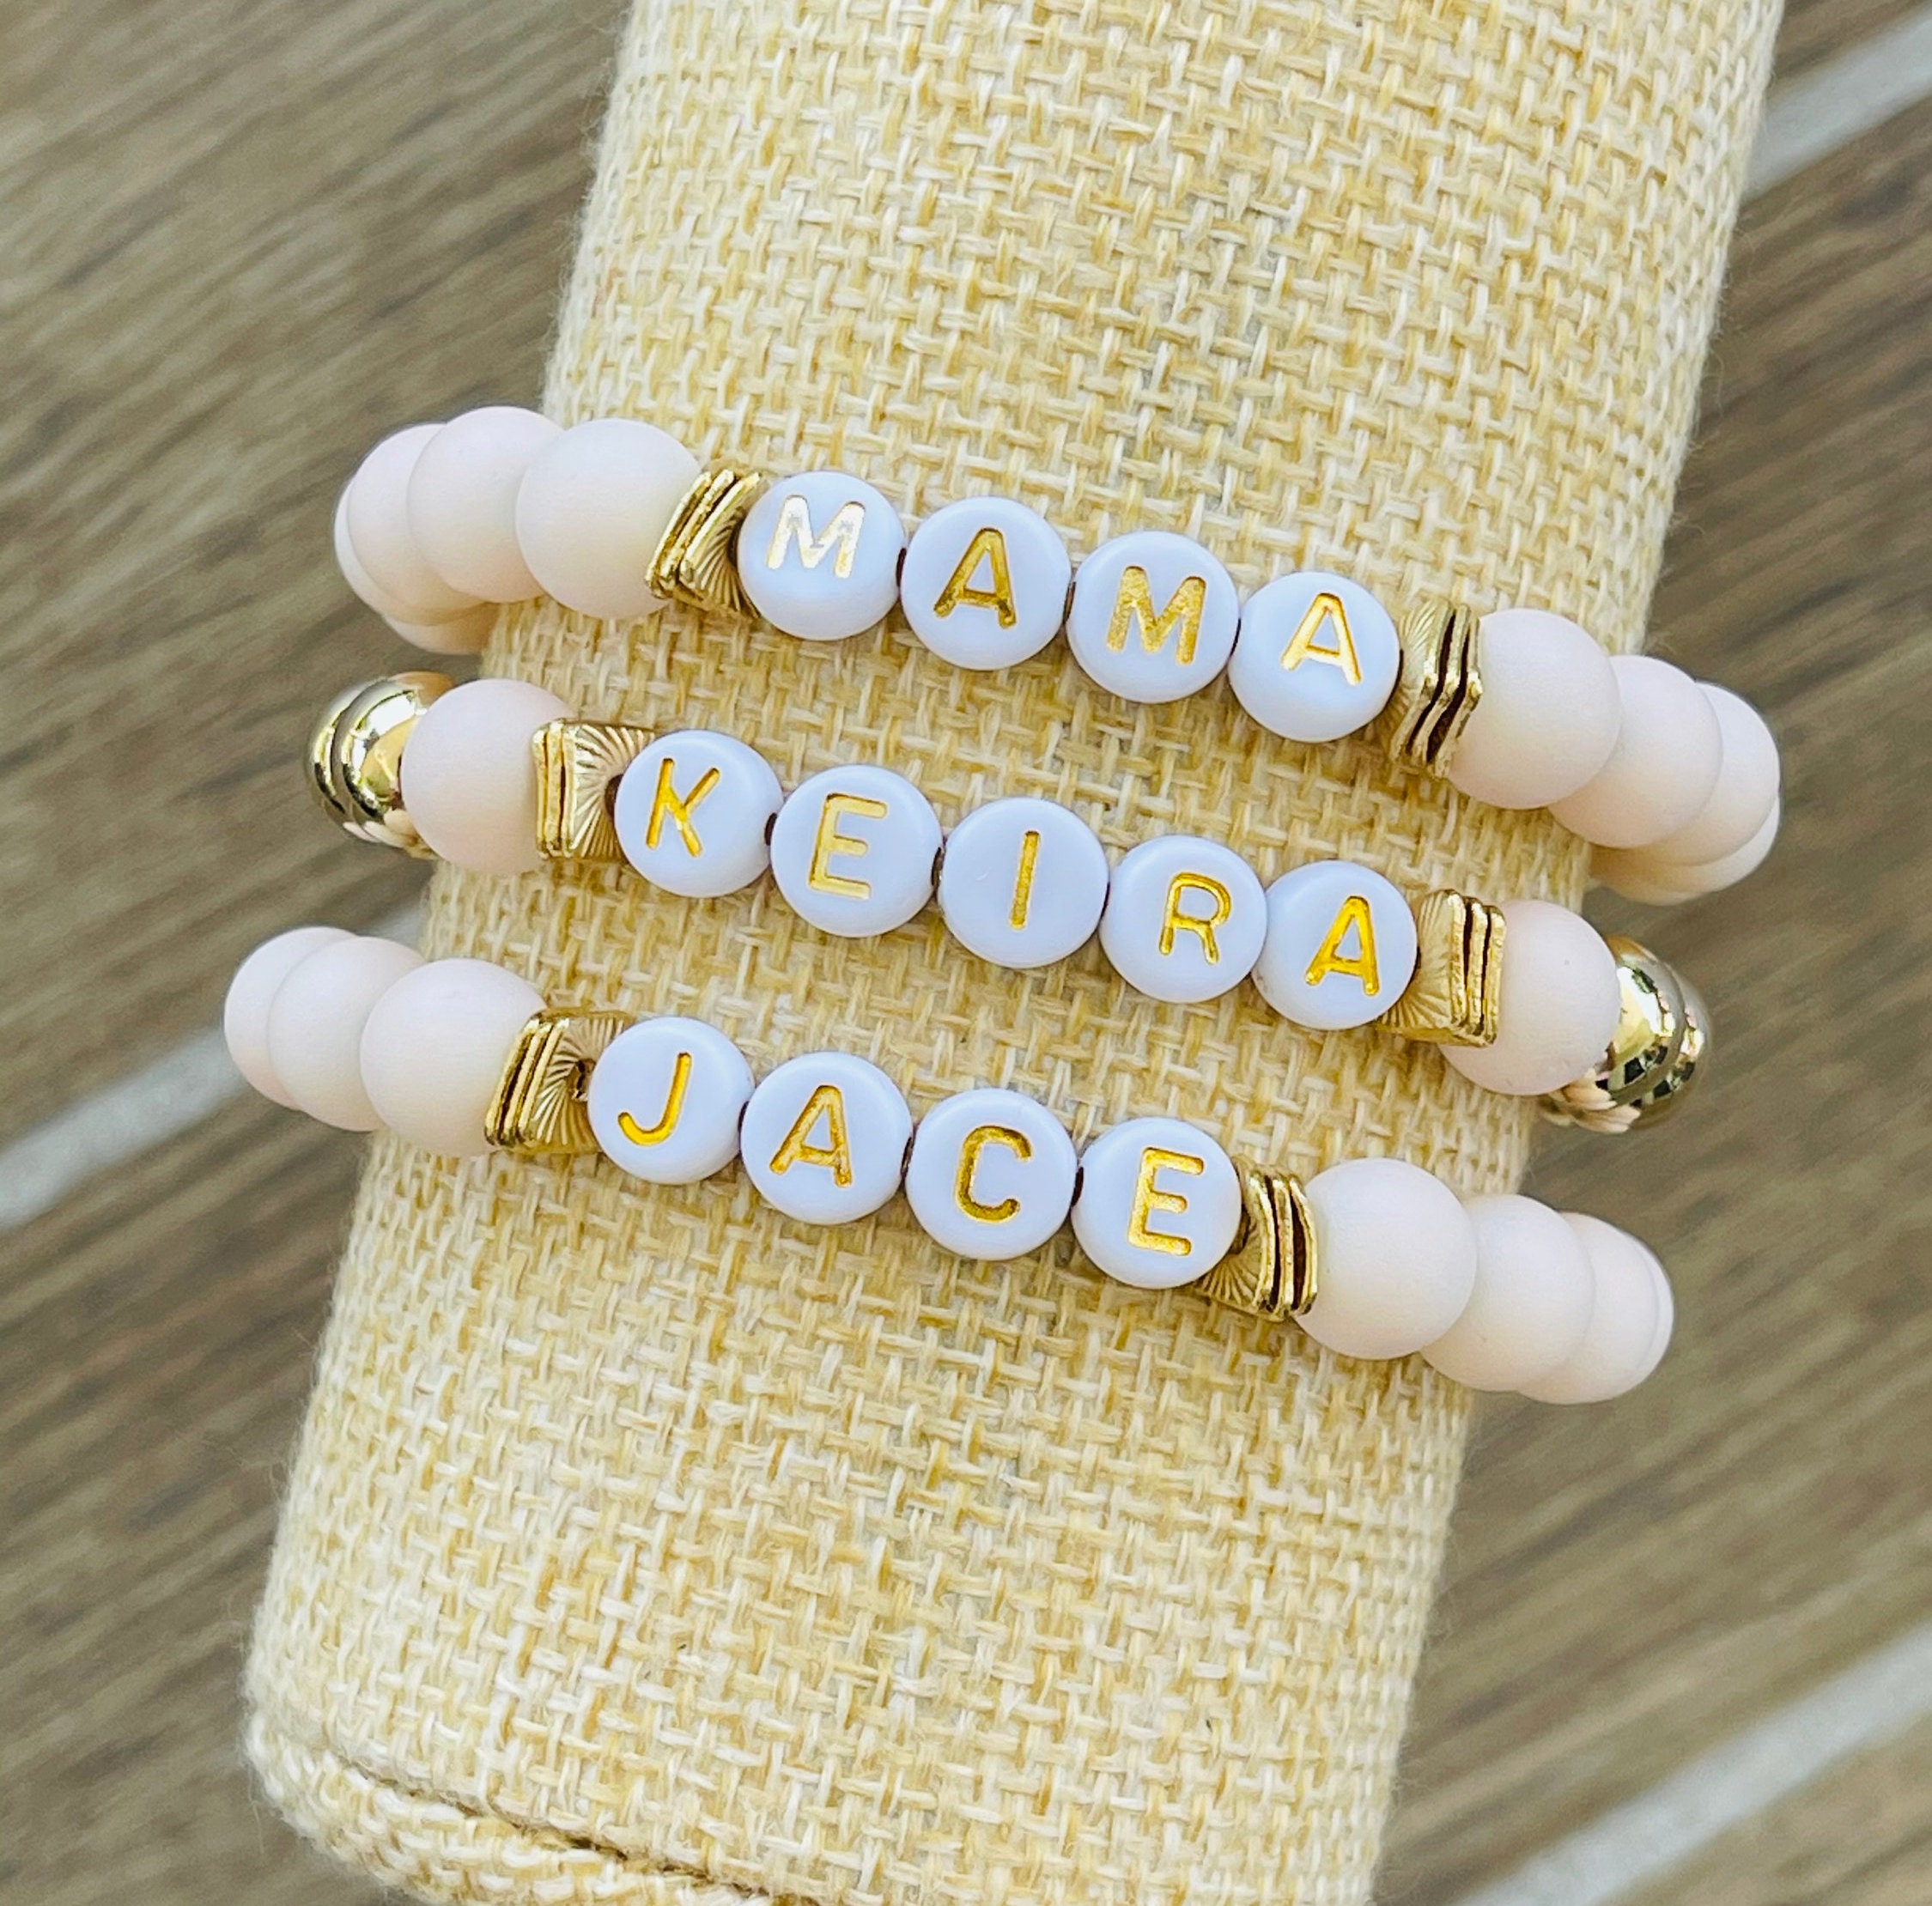 Beaded Natural Stone Bracelet Featuring Letter Beads That Sa (430037)